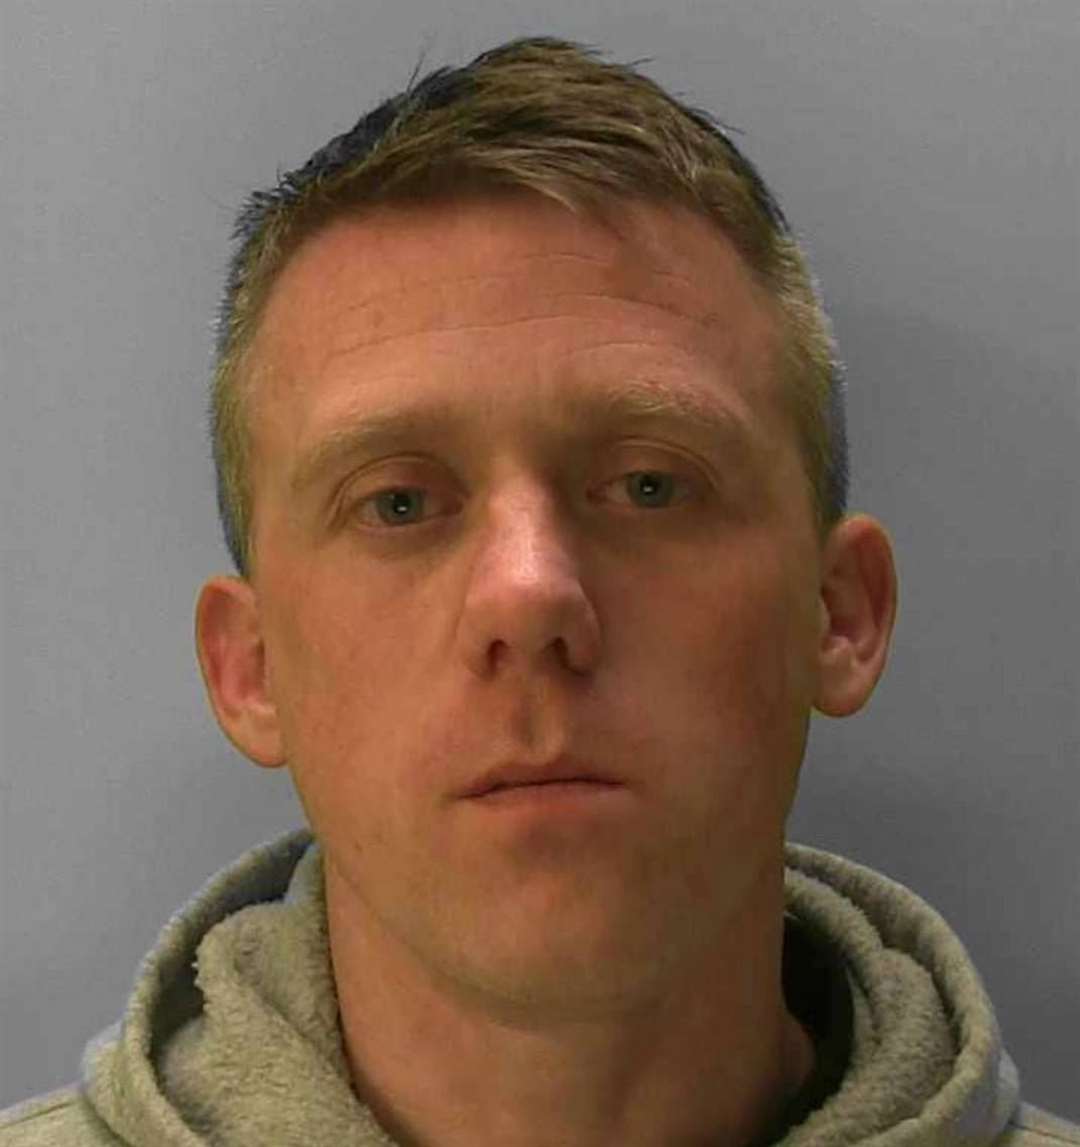 Peter Harlow, 36, from Pembury, is wanted on recall to prison. Photo: Sussex Police